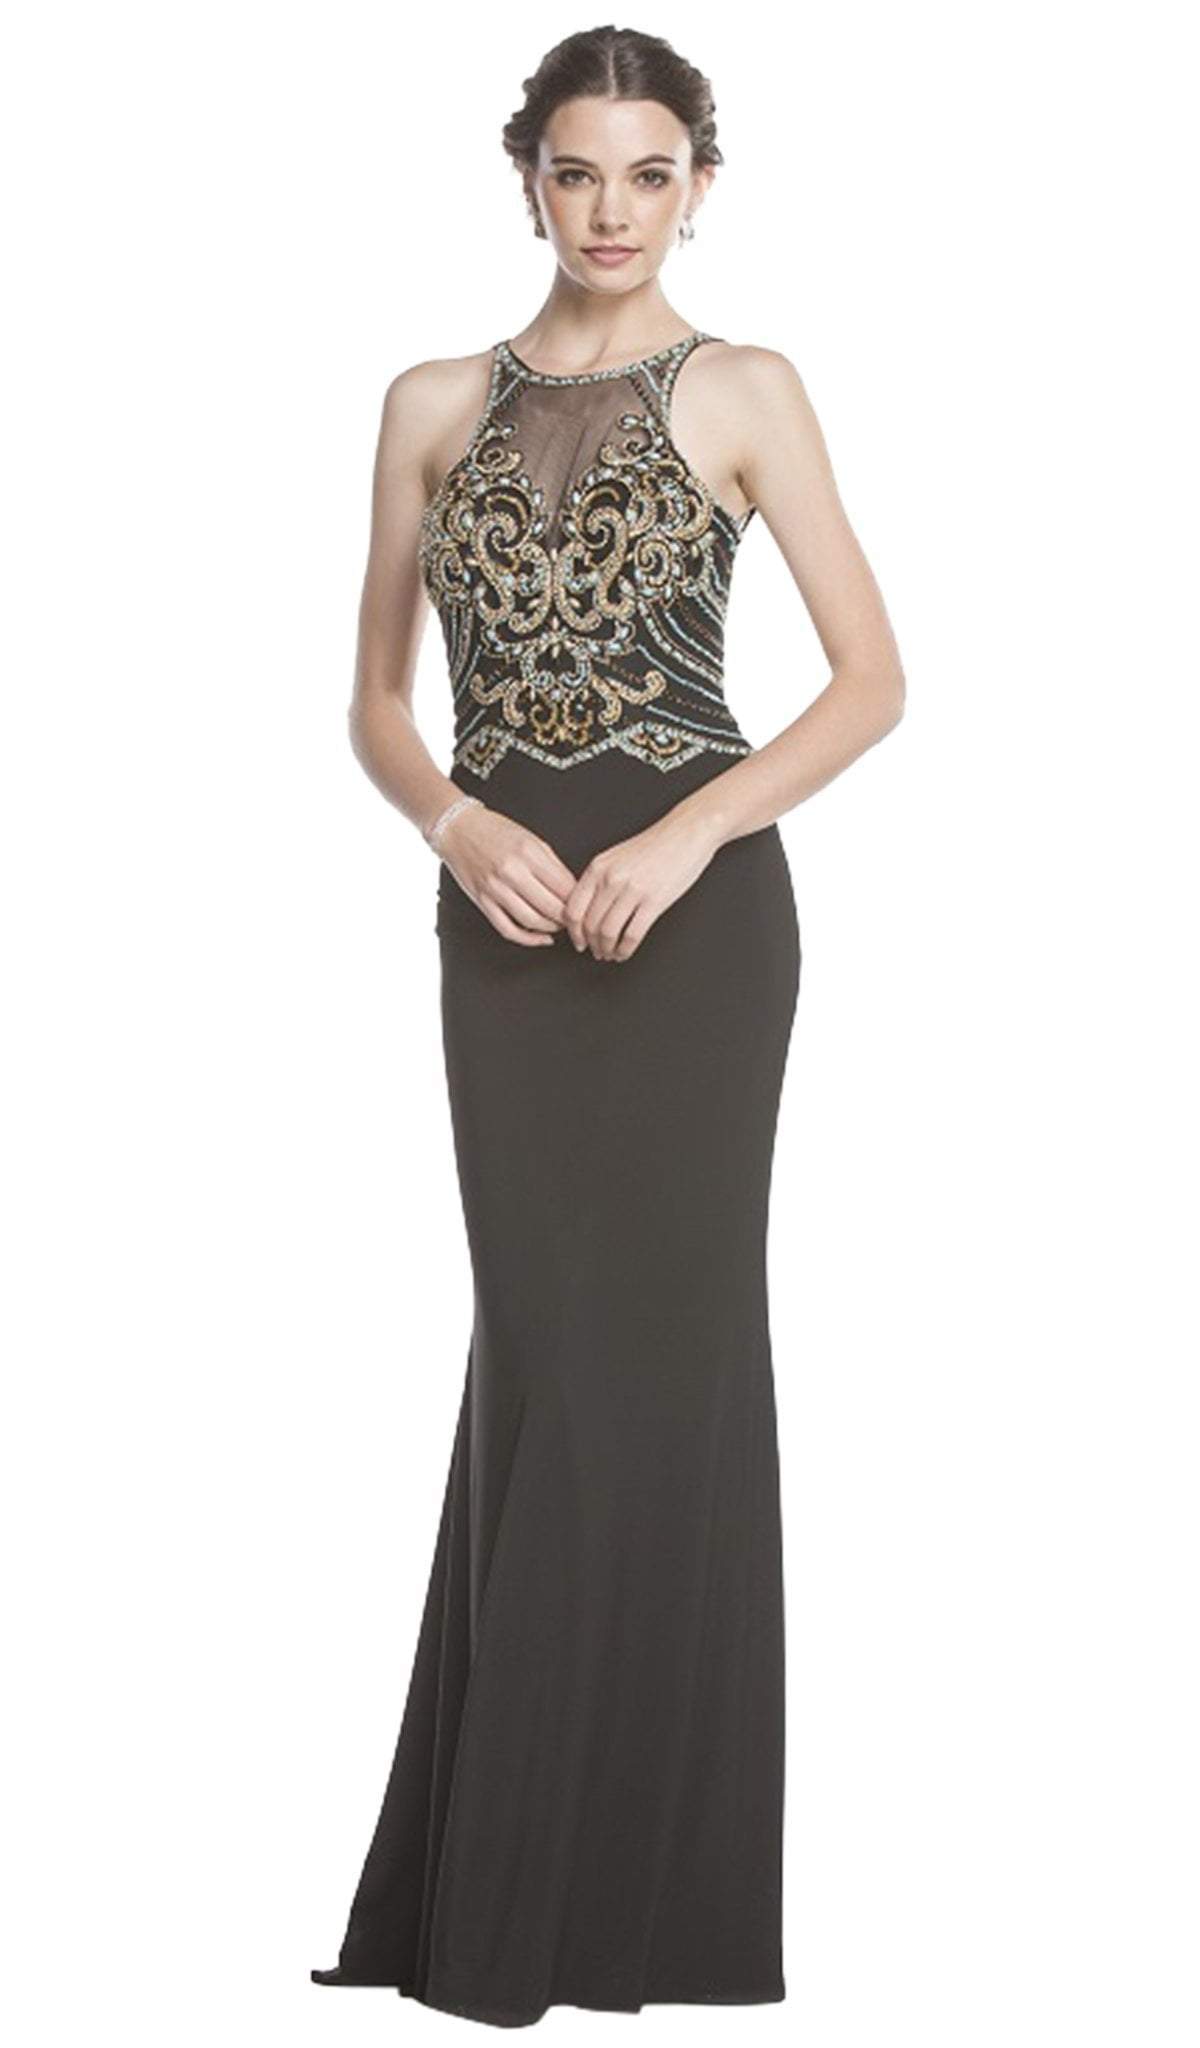 Aspeed Design - Bedazzled Illusion Halter Fitted Evening Dress
